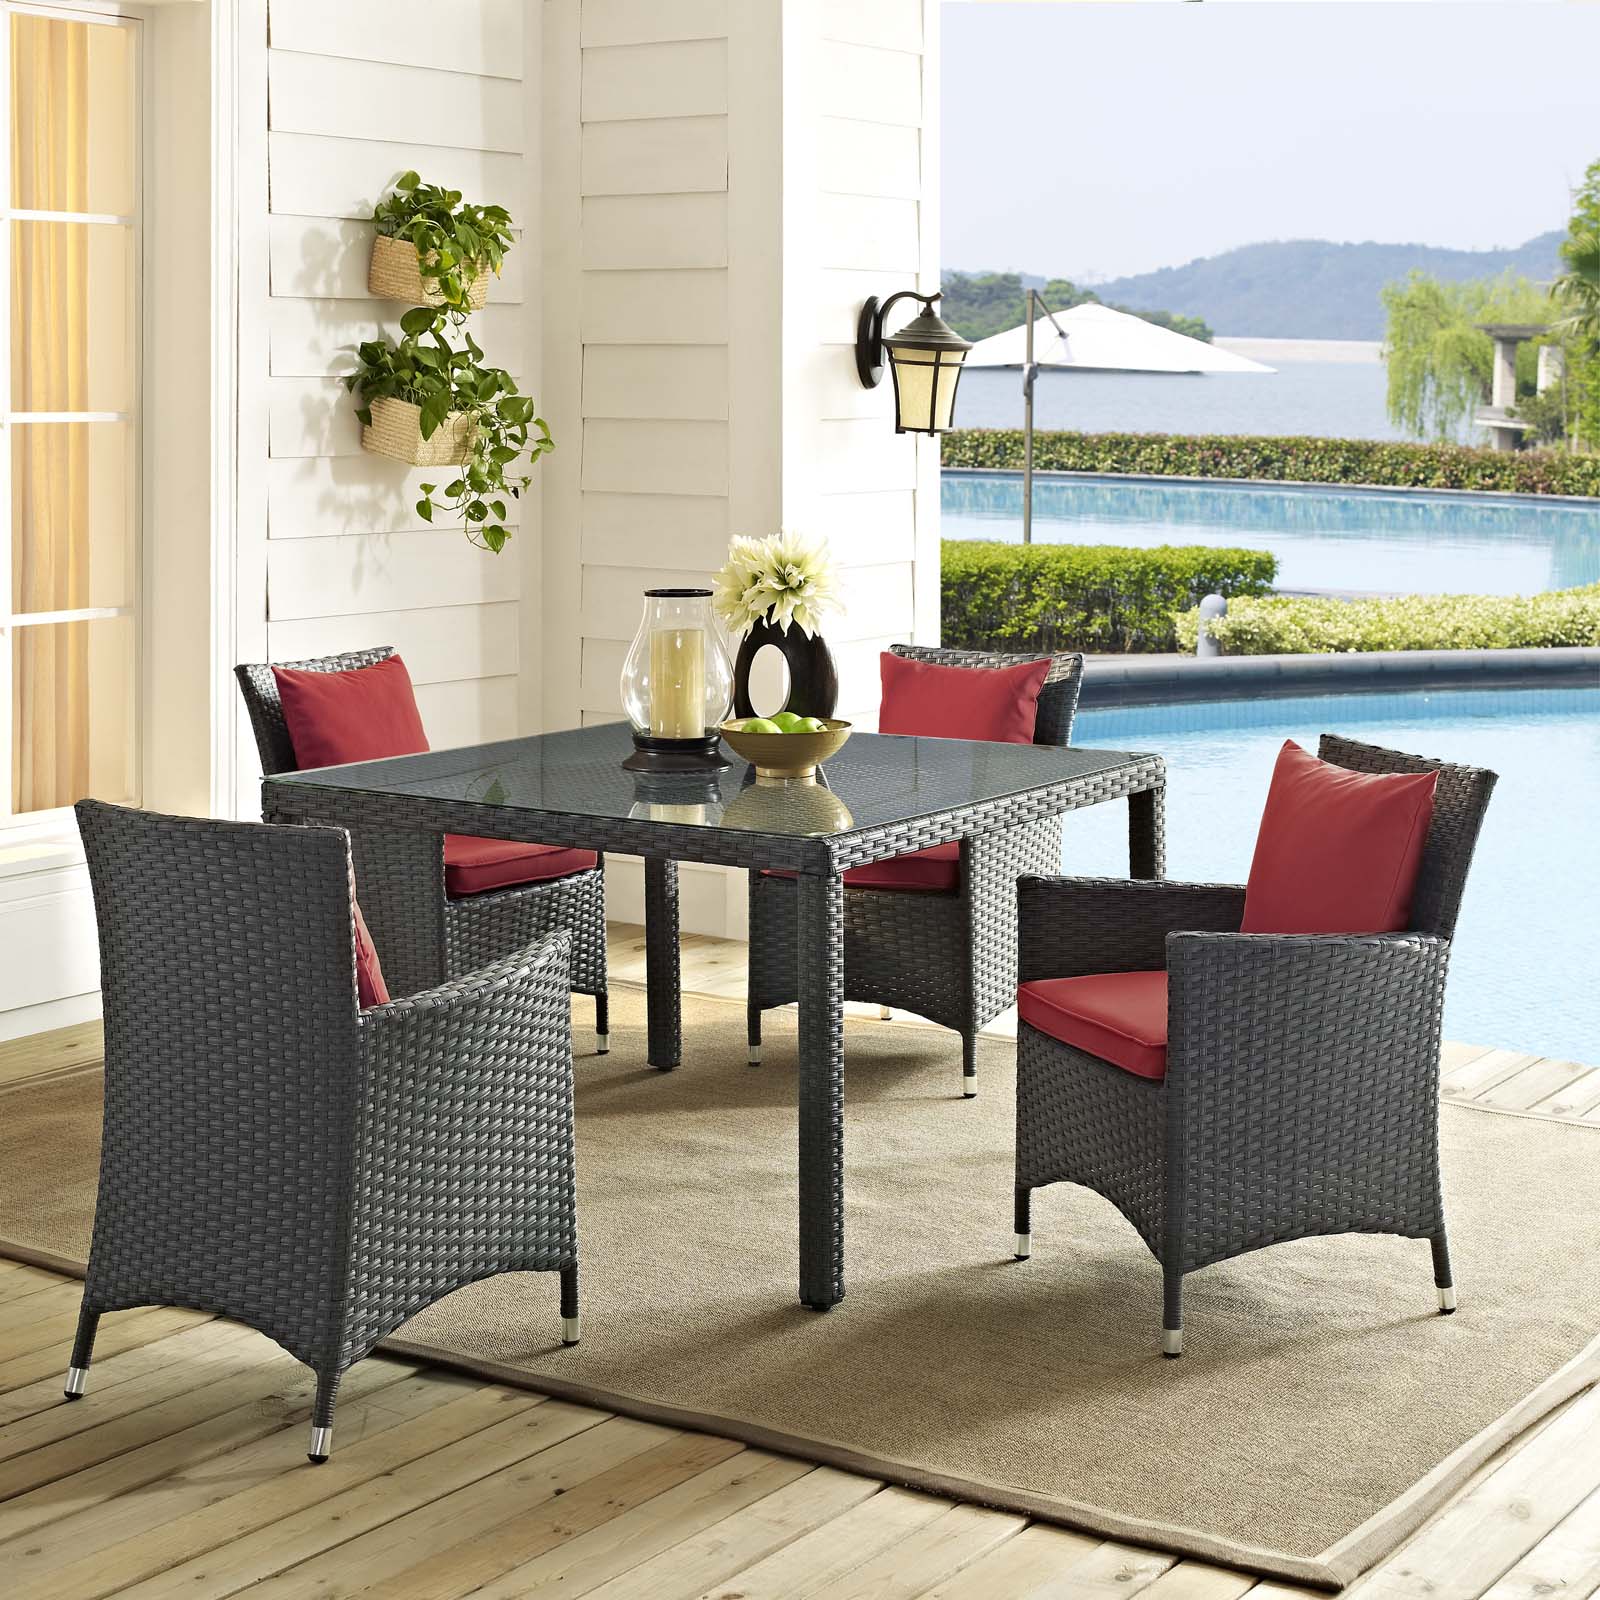 Modway Sojourn 4 Piece Outdoor Patio Sunbrella® Dining Set in Canvas Red - image 1 of 5